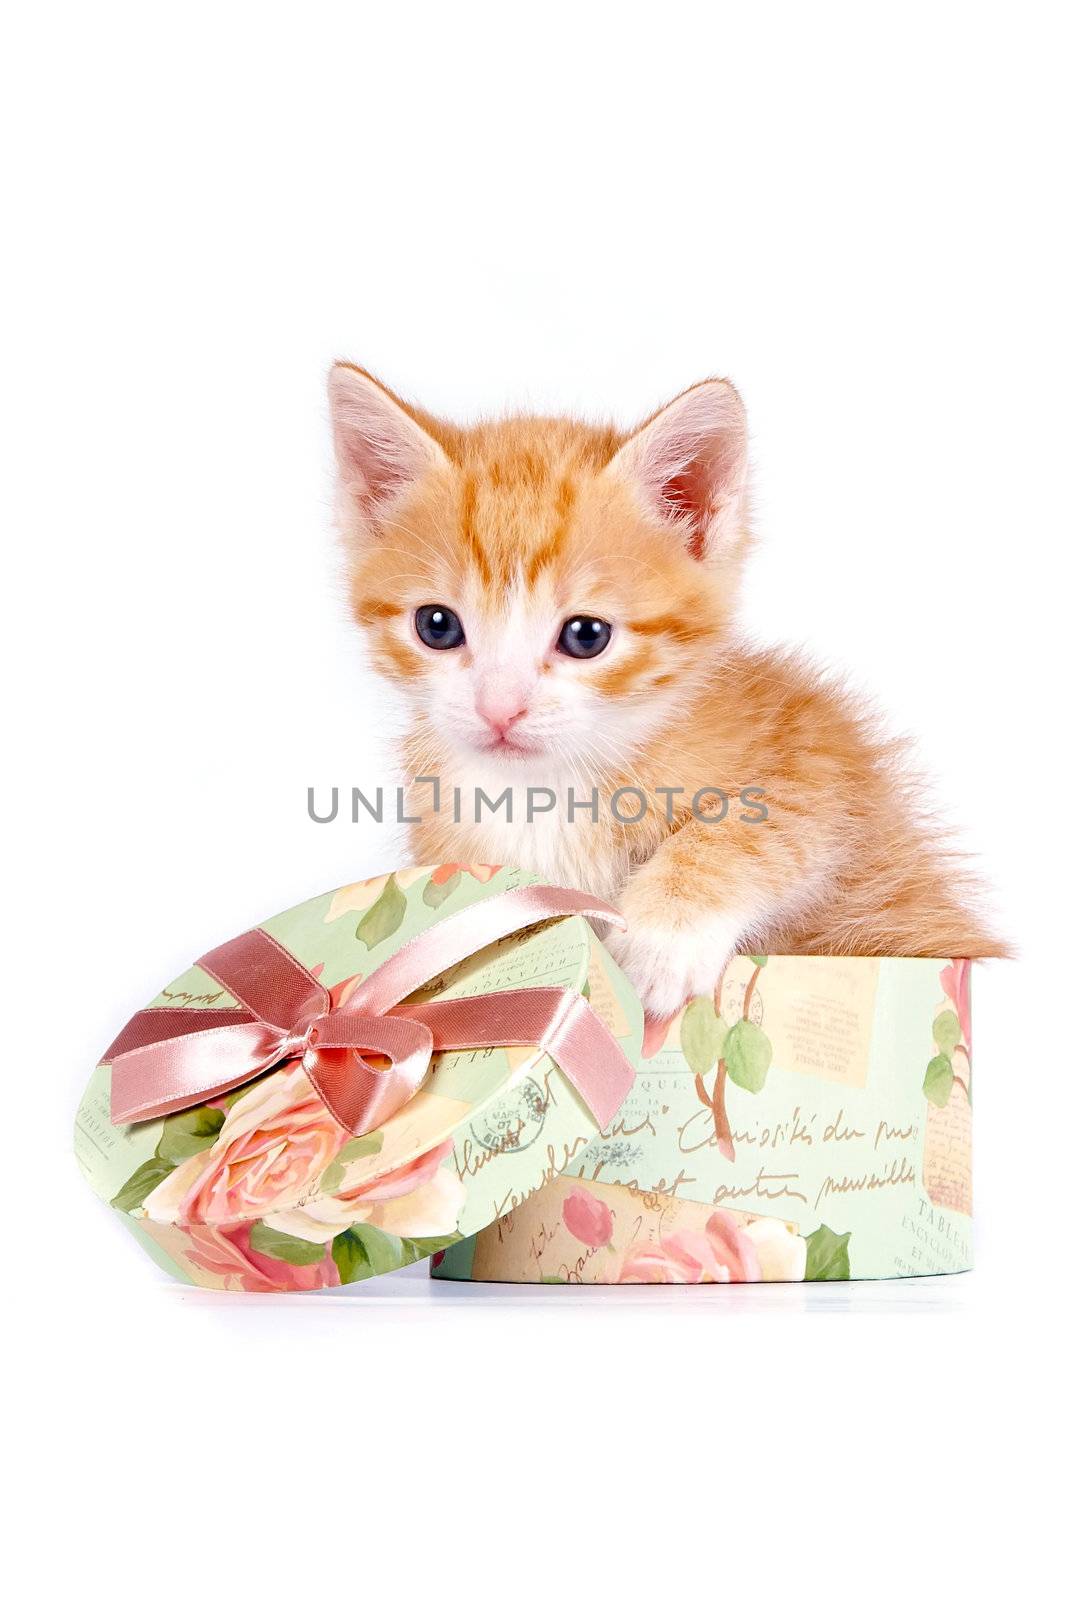 Red kitten in a gift box on a white background